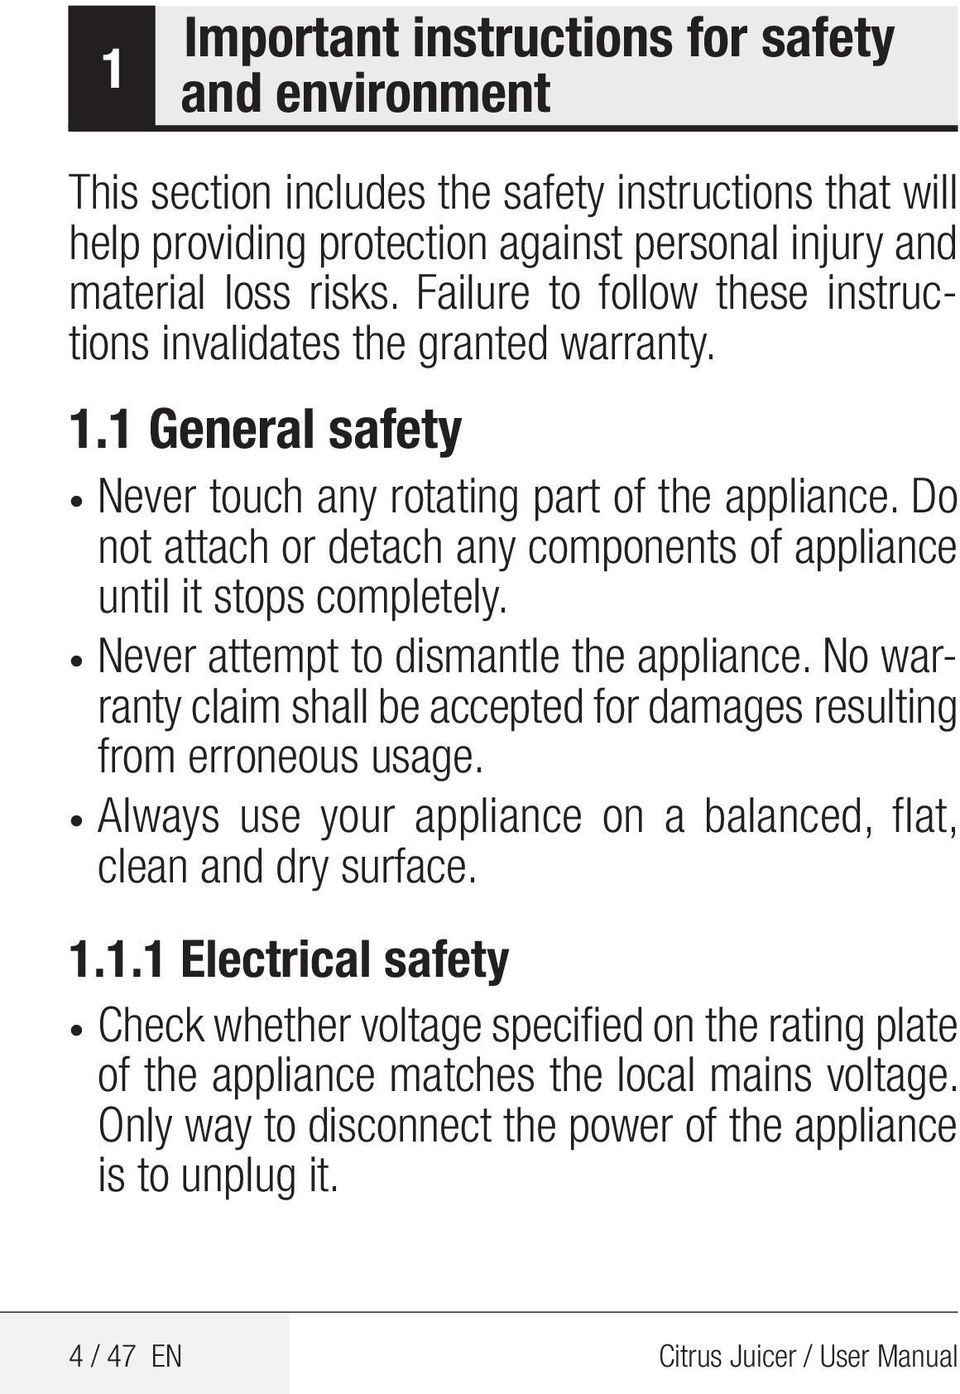 Do not attach or detach any components of appliance until it stops completely. Never attempt to dismantle the appliance. No warranty claim shall be accepted for damages resulting from erroneous usage.